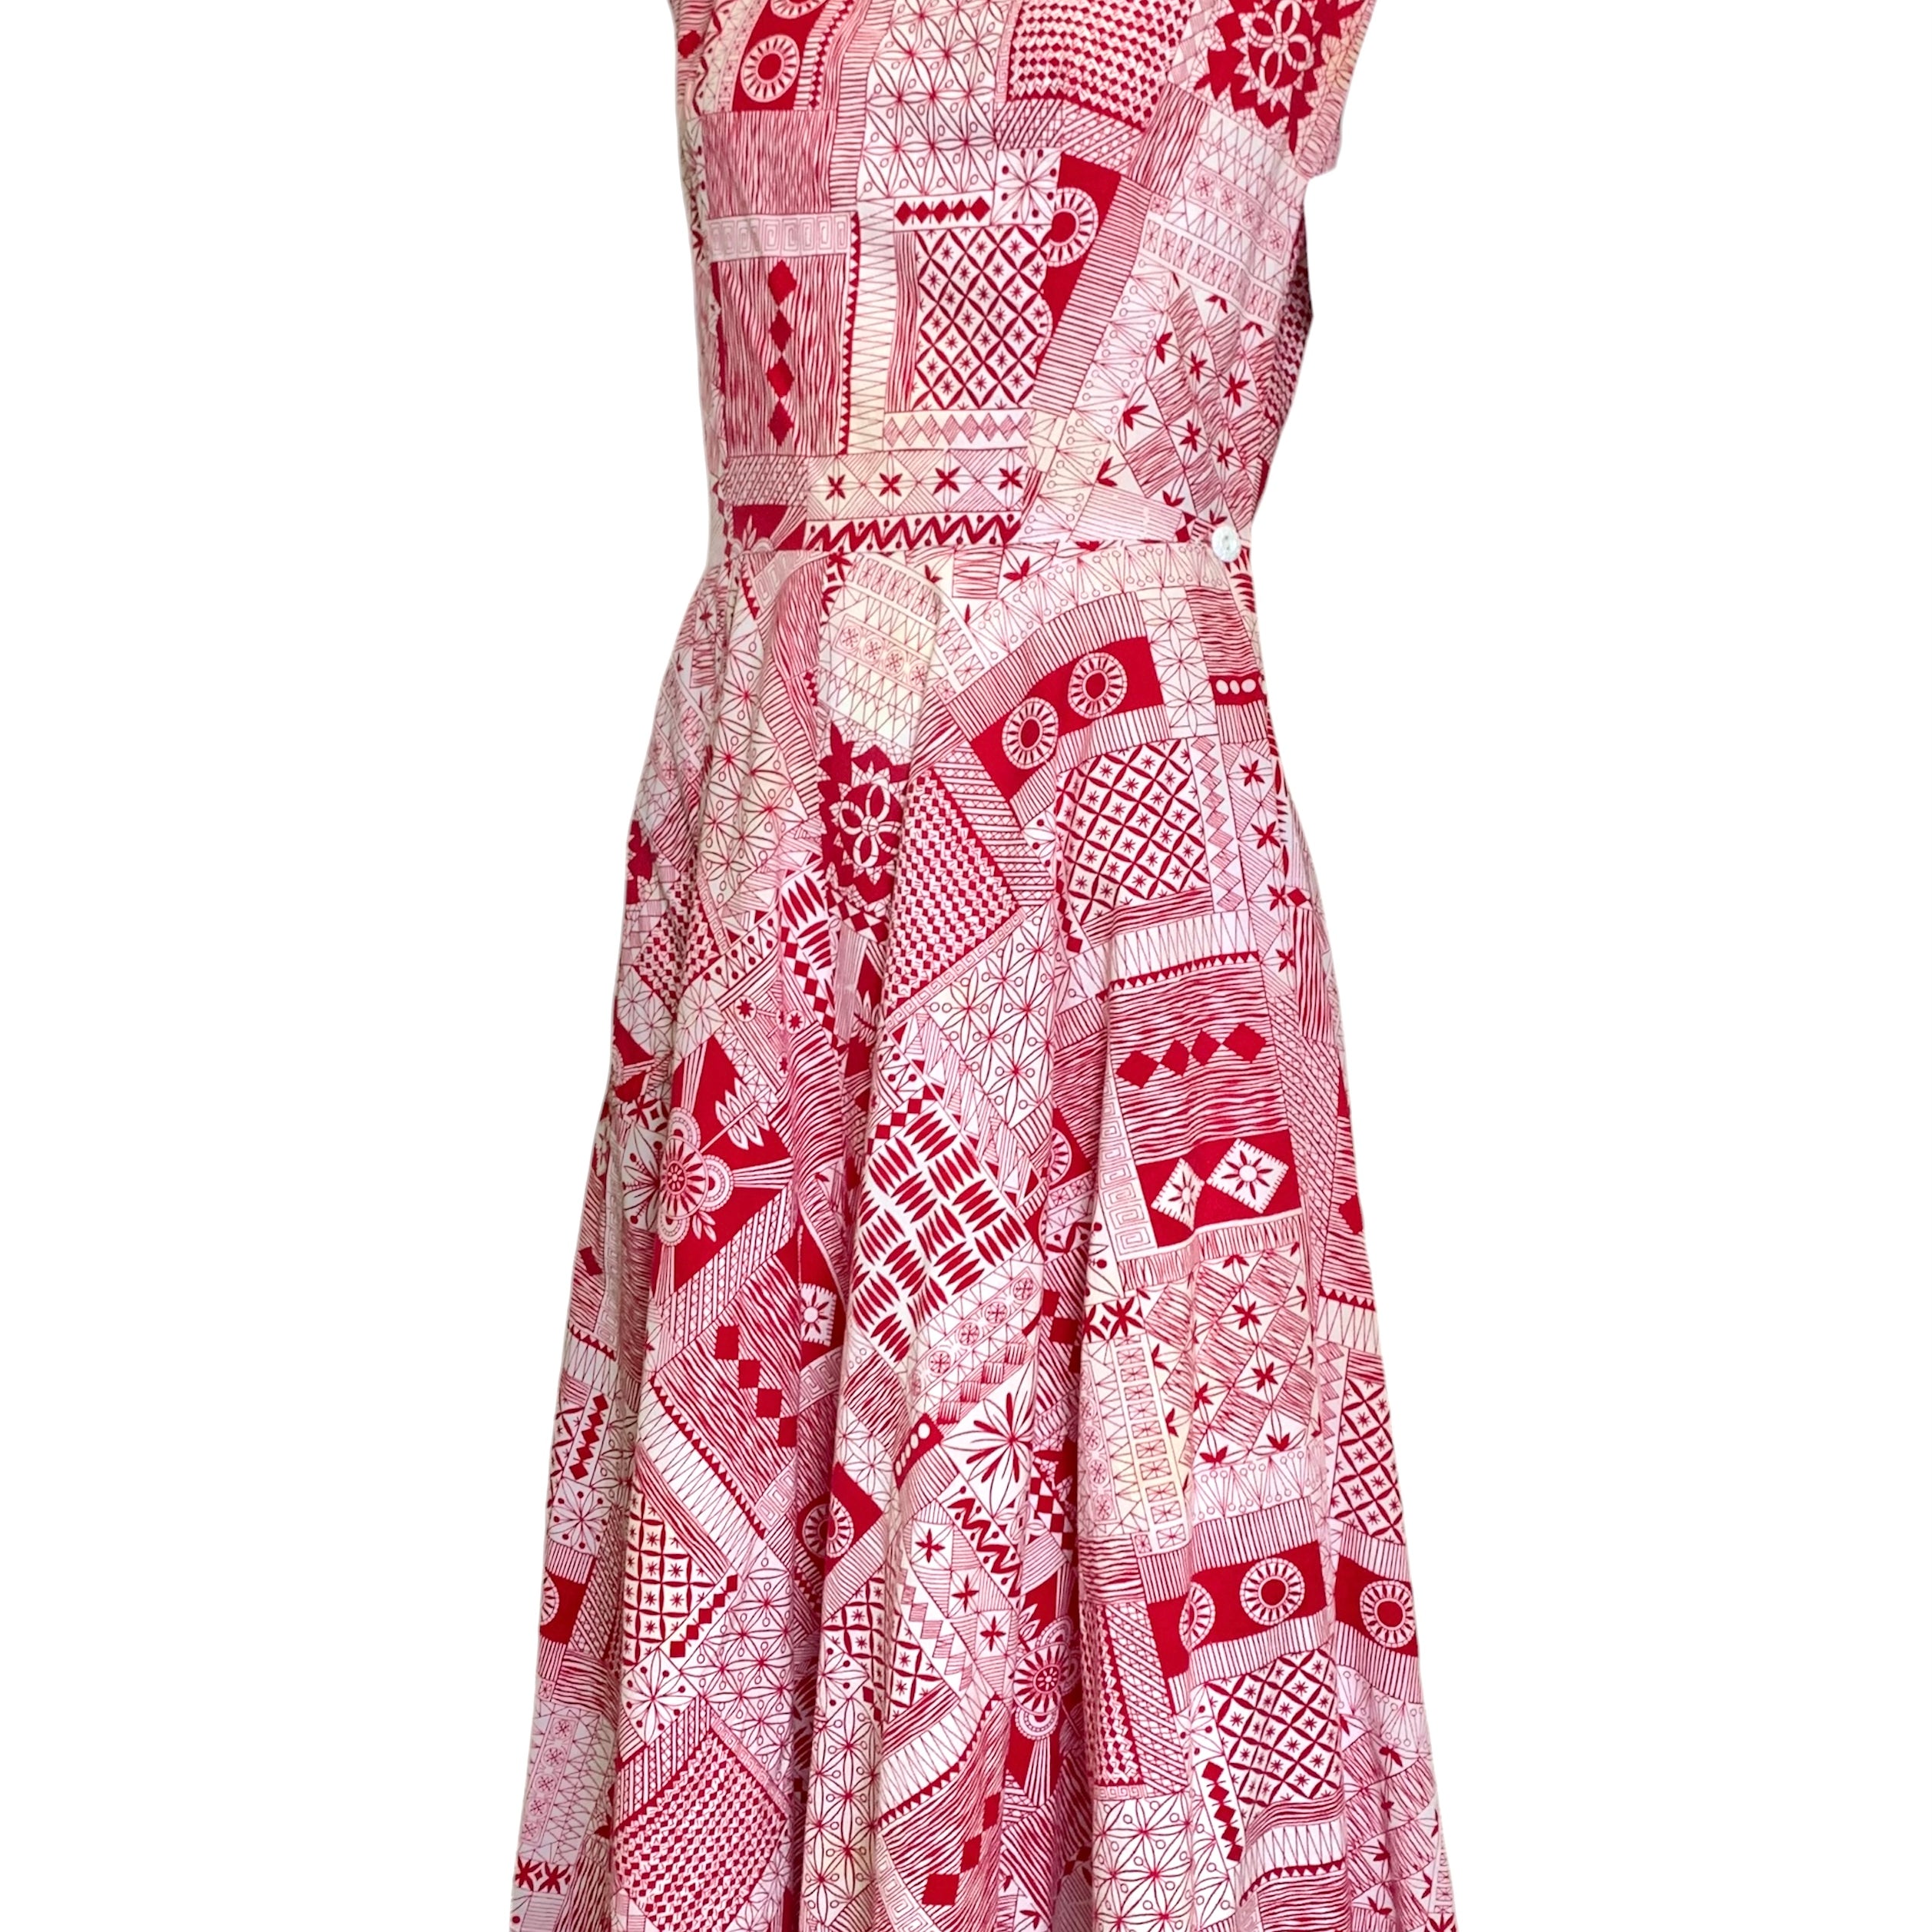 Dixie Lou Frock '50s Red Block Print Day Dress SIDE